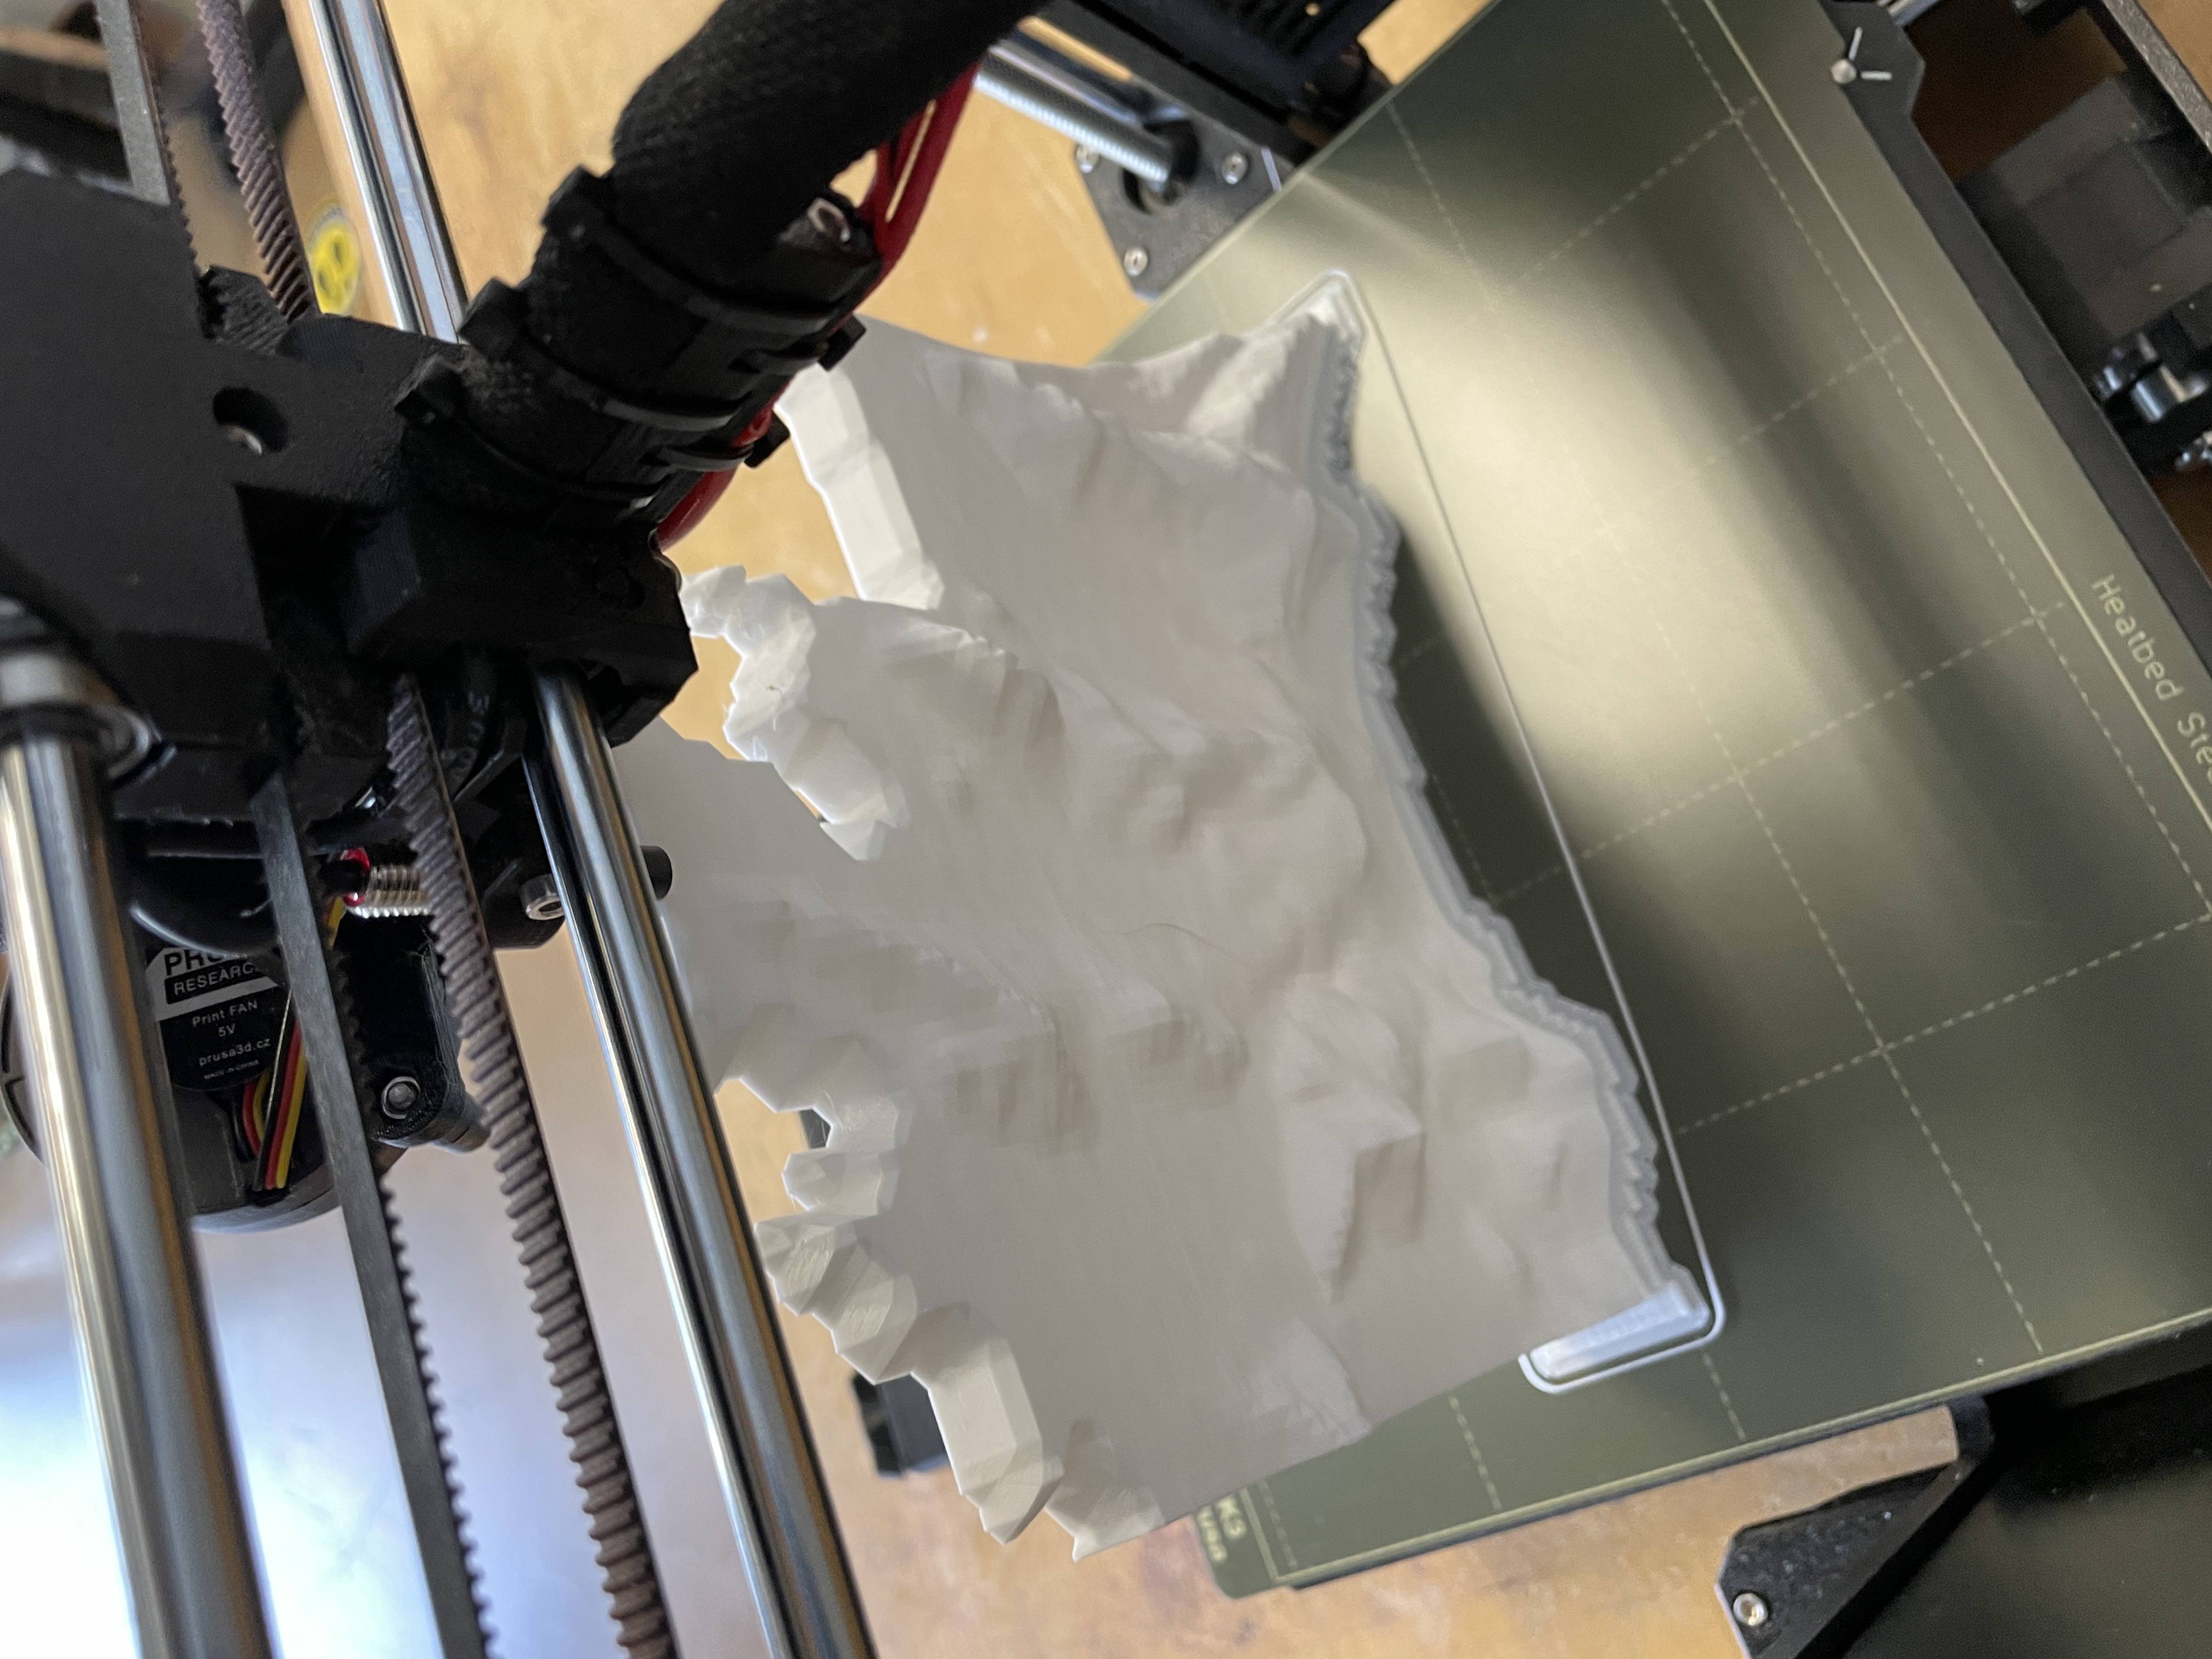 Printing one quarter of the map